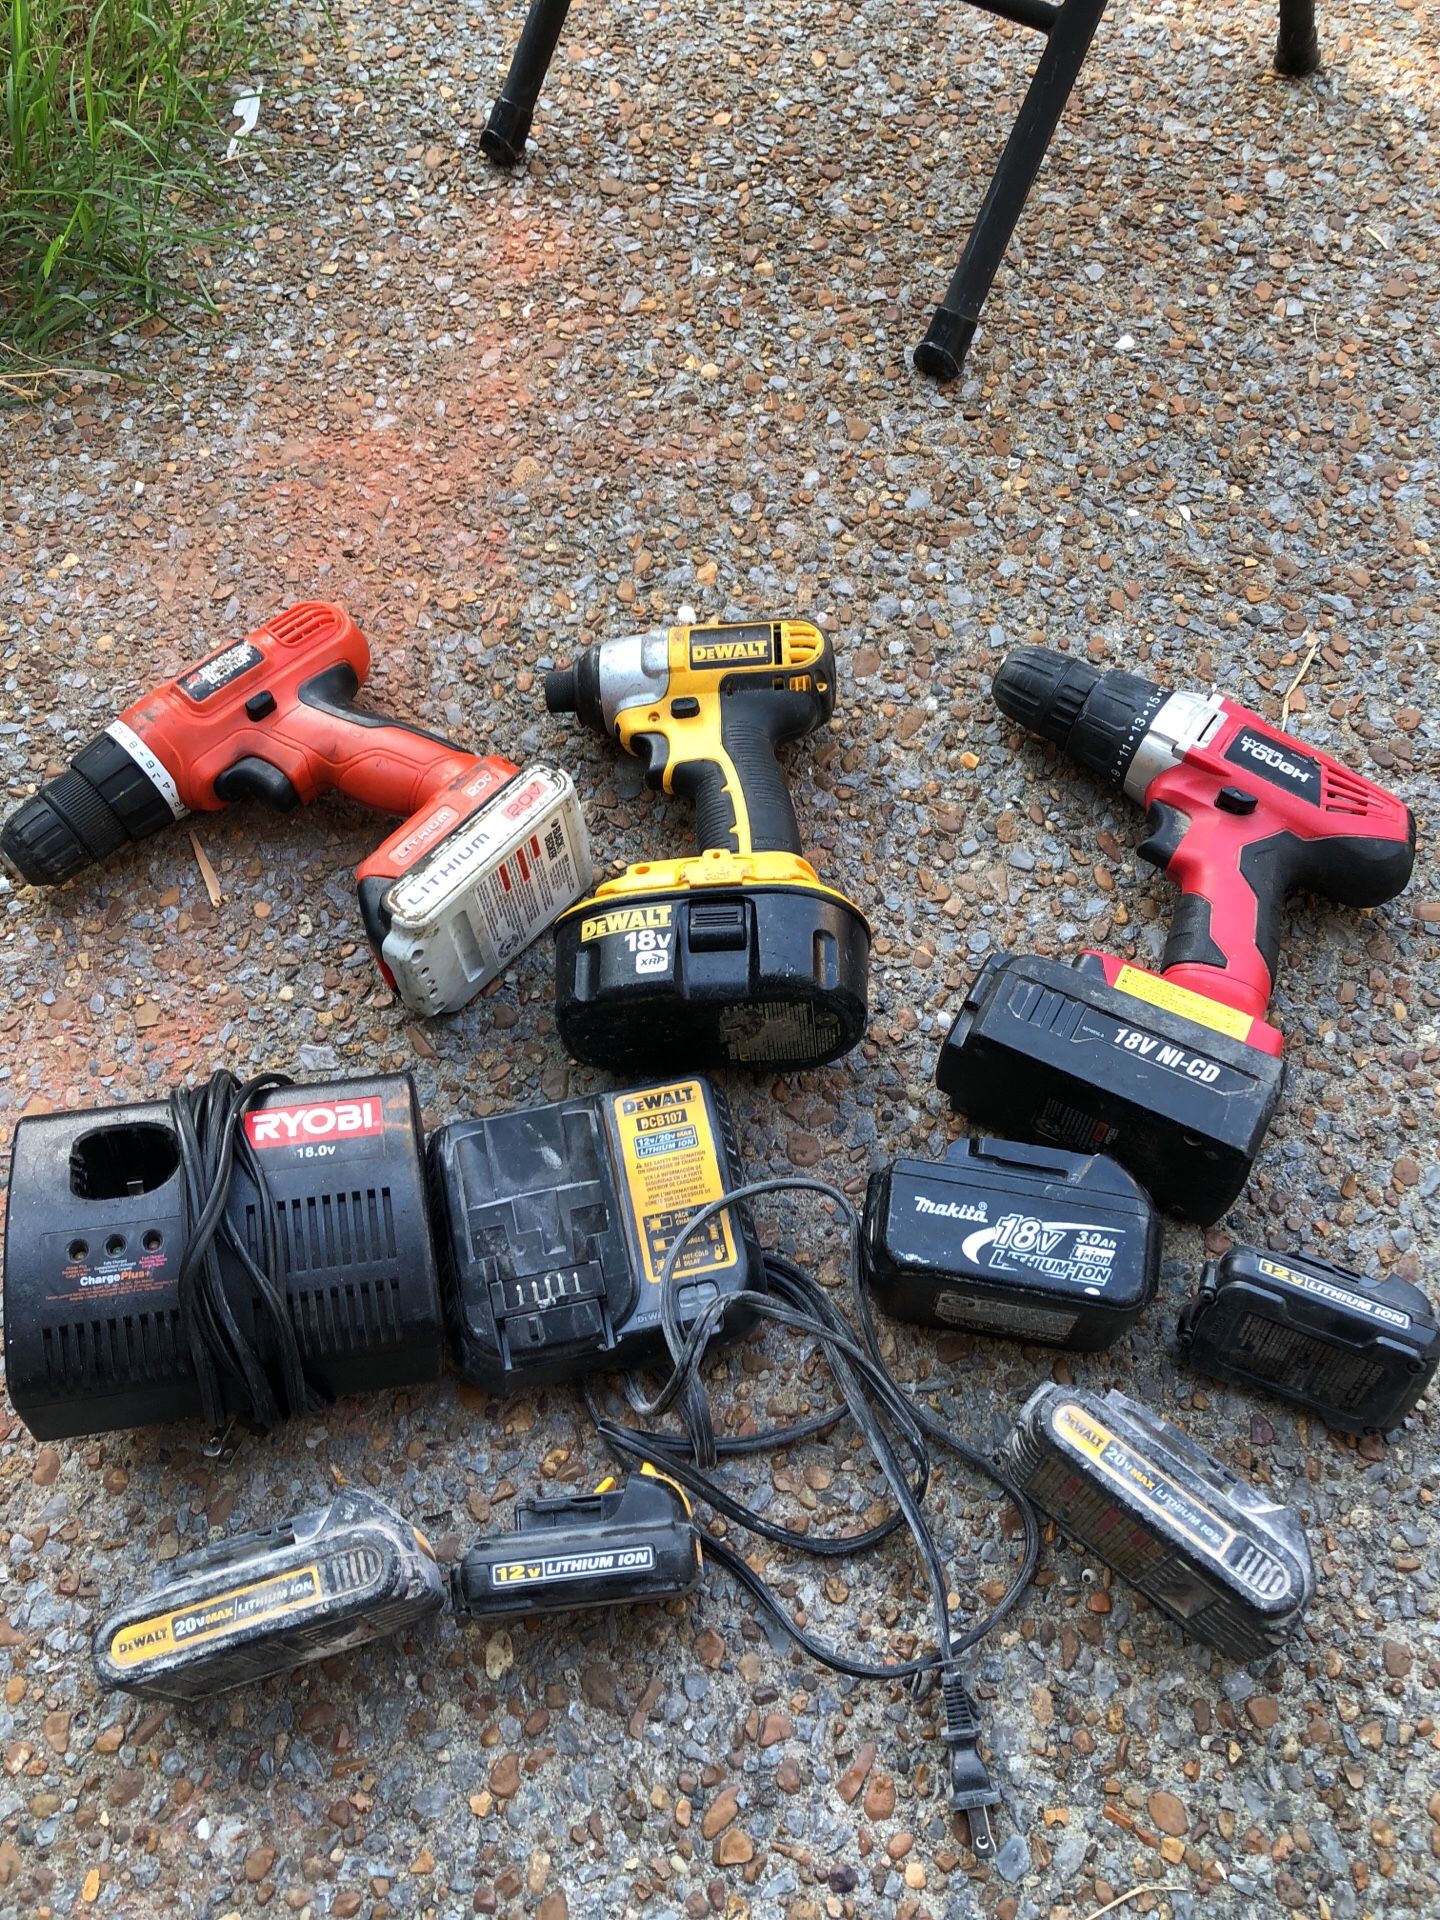 Power tools and batteries